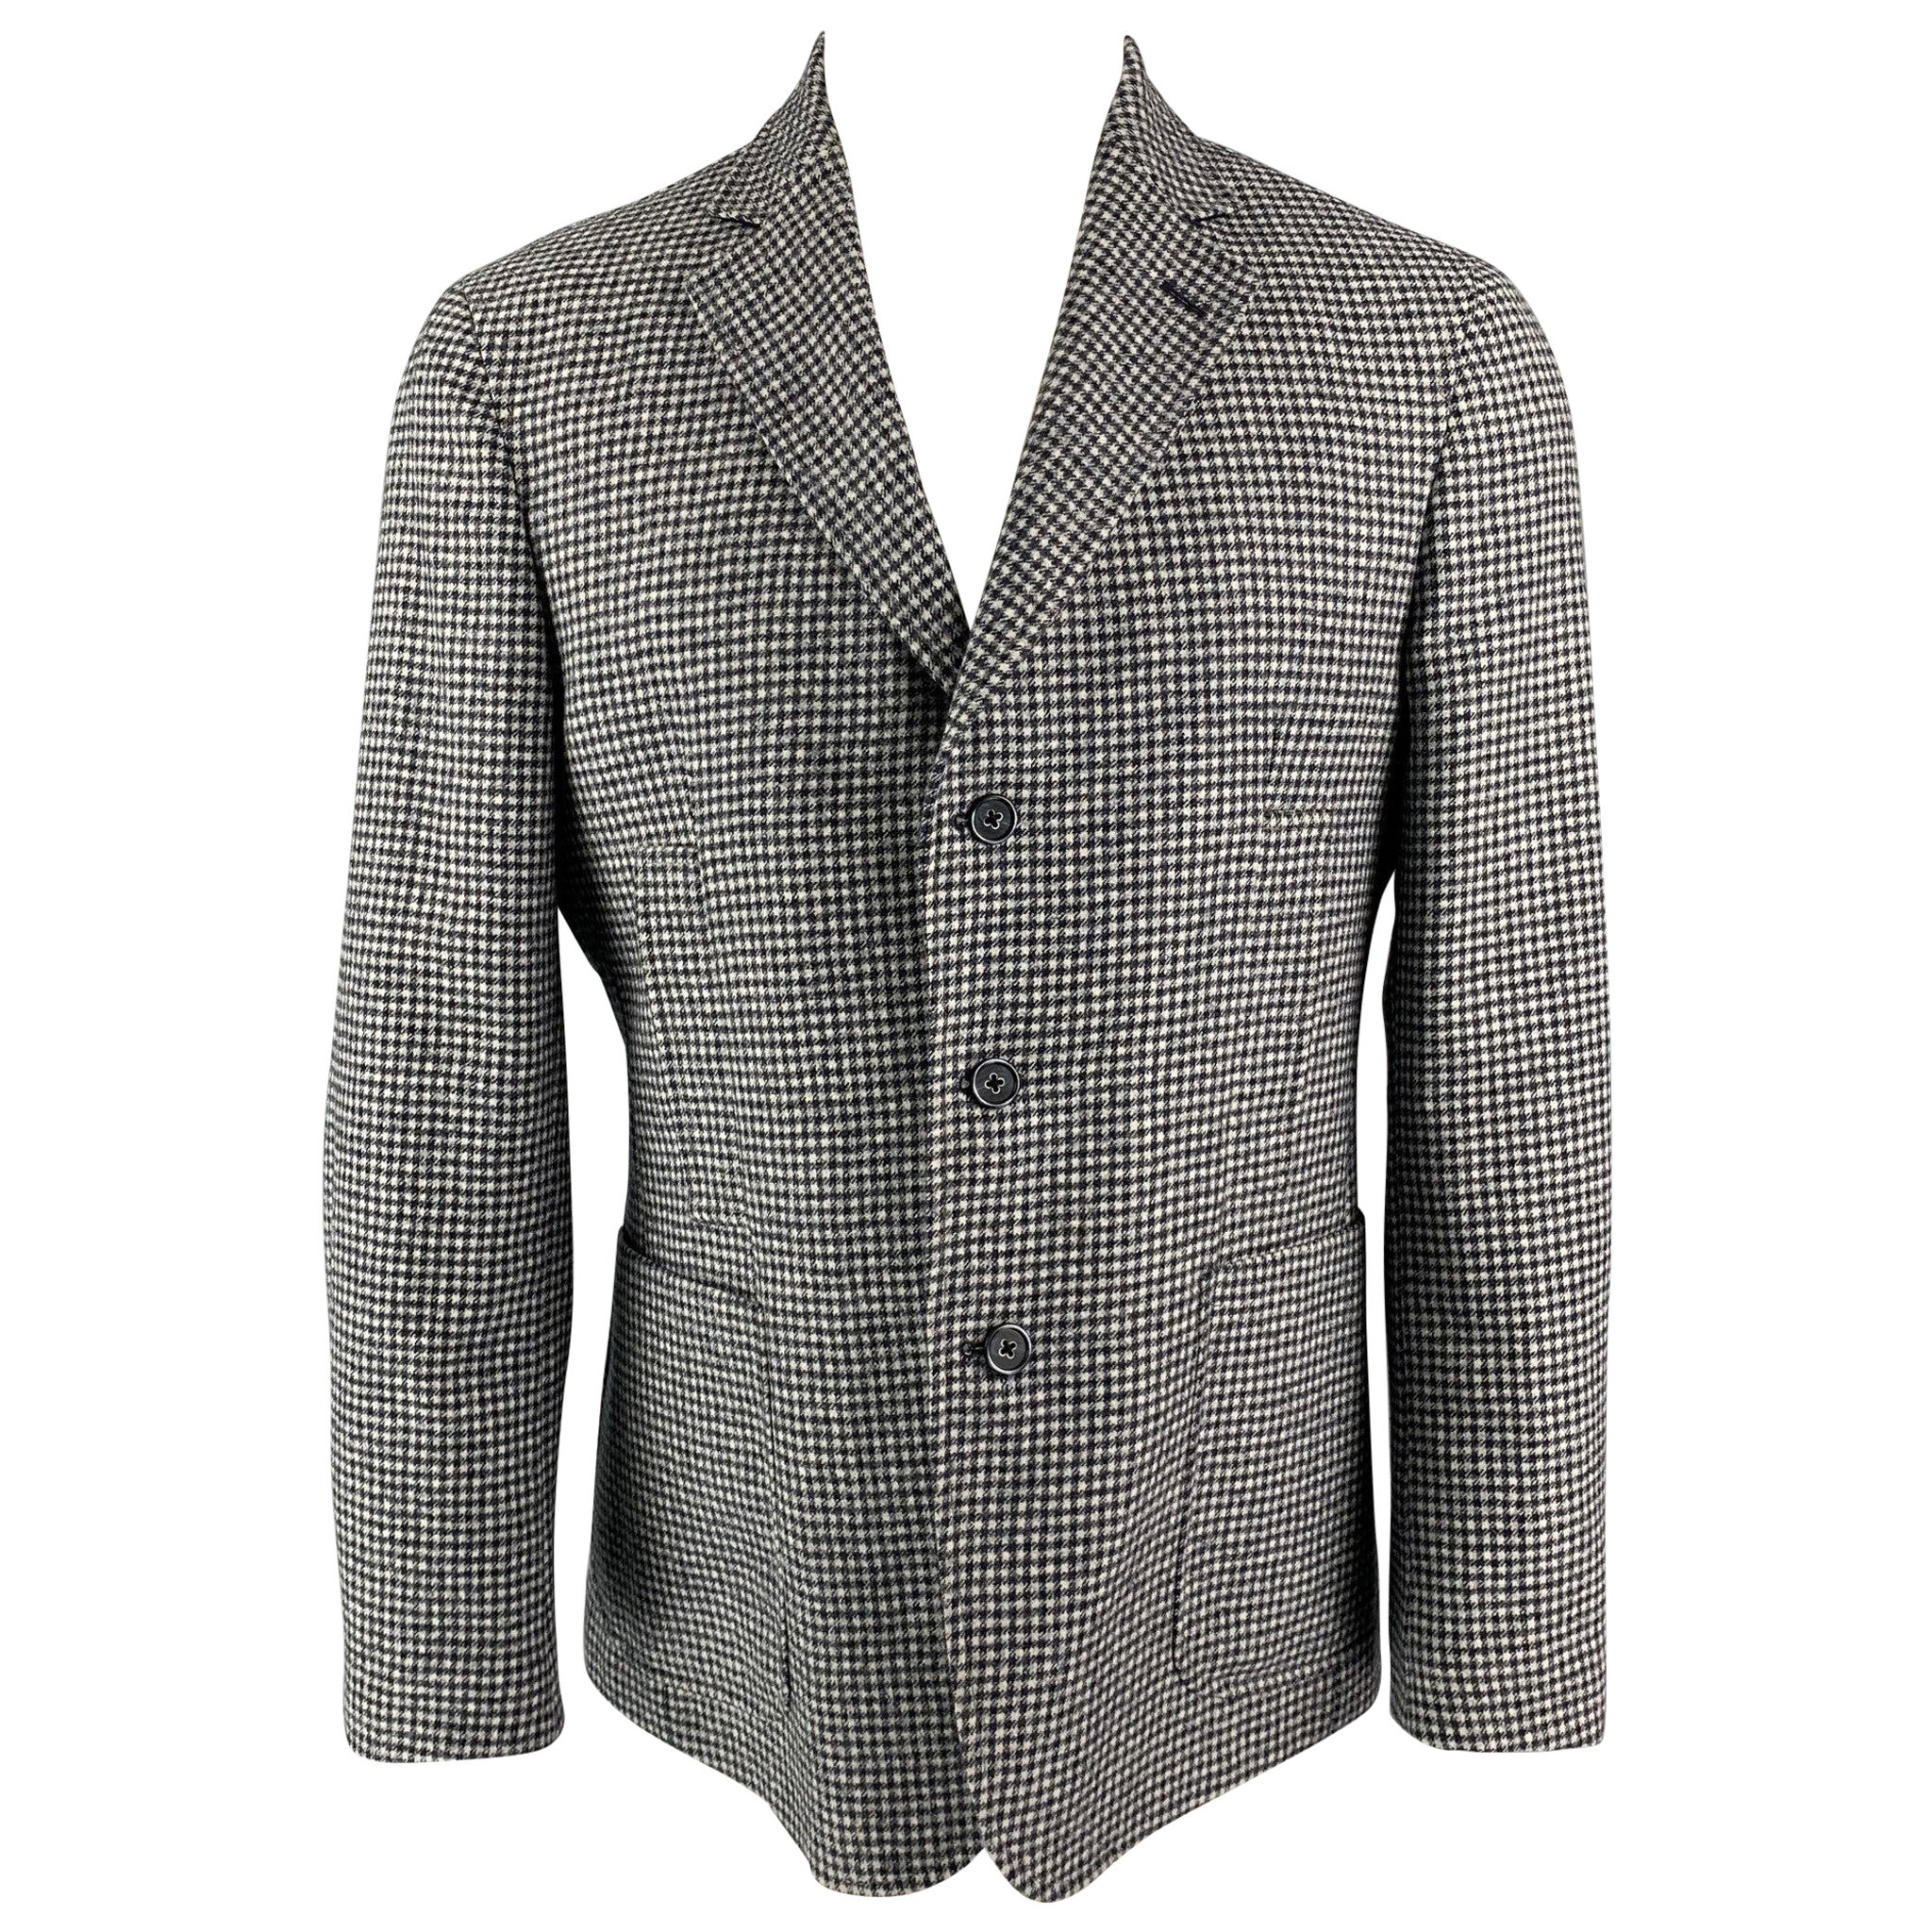 NEIMAN MARCUS Size 40 Wool Black & White Houndstooth Notch Lapel Sport Coat For Sale